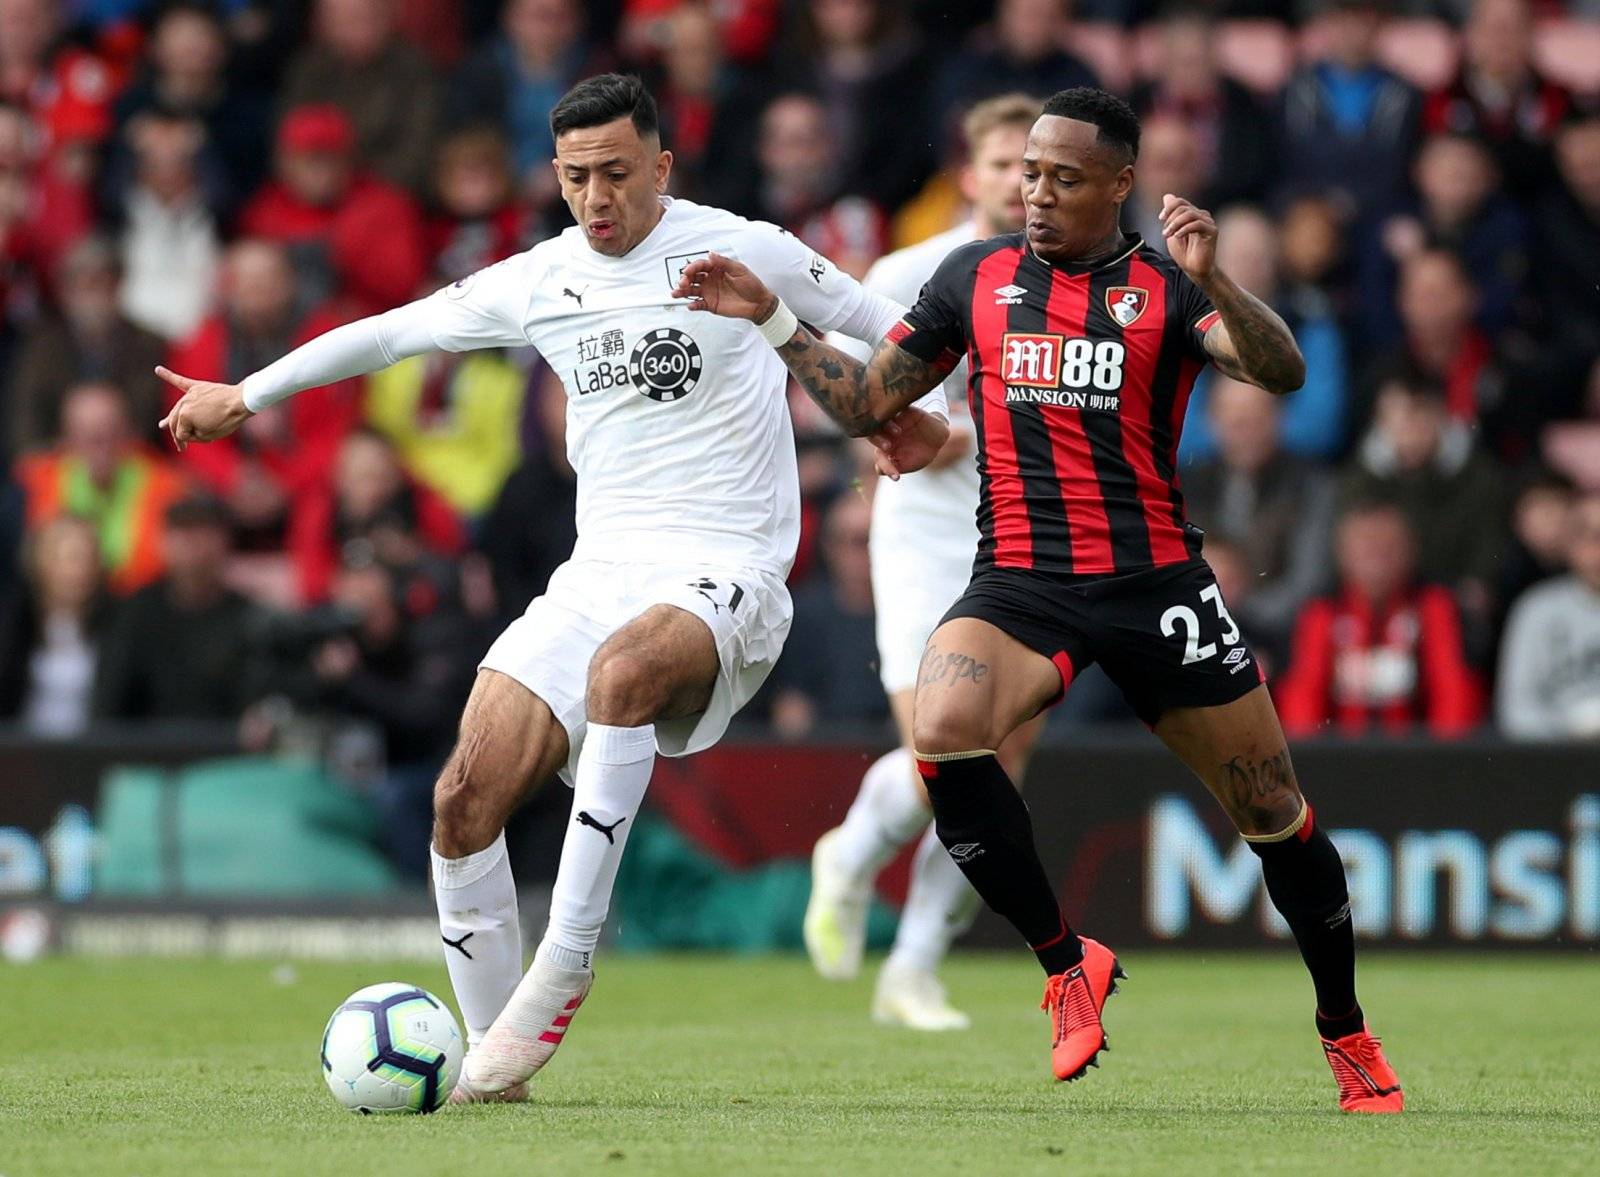 Potential consequences of West Ham signing Nathaniel Clyne - Premier League